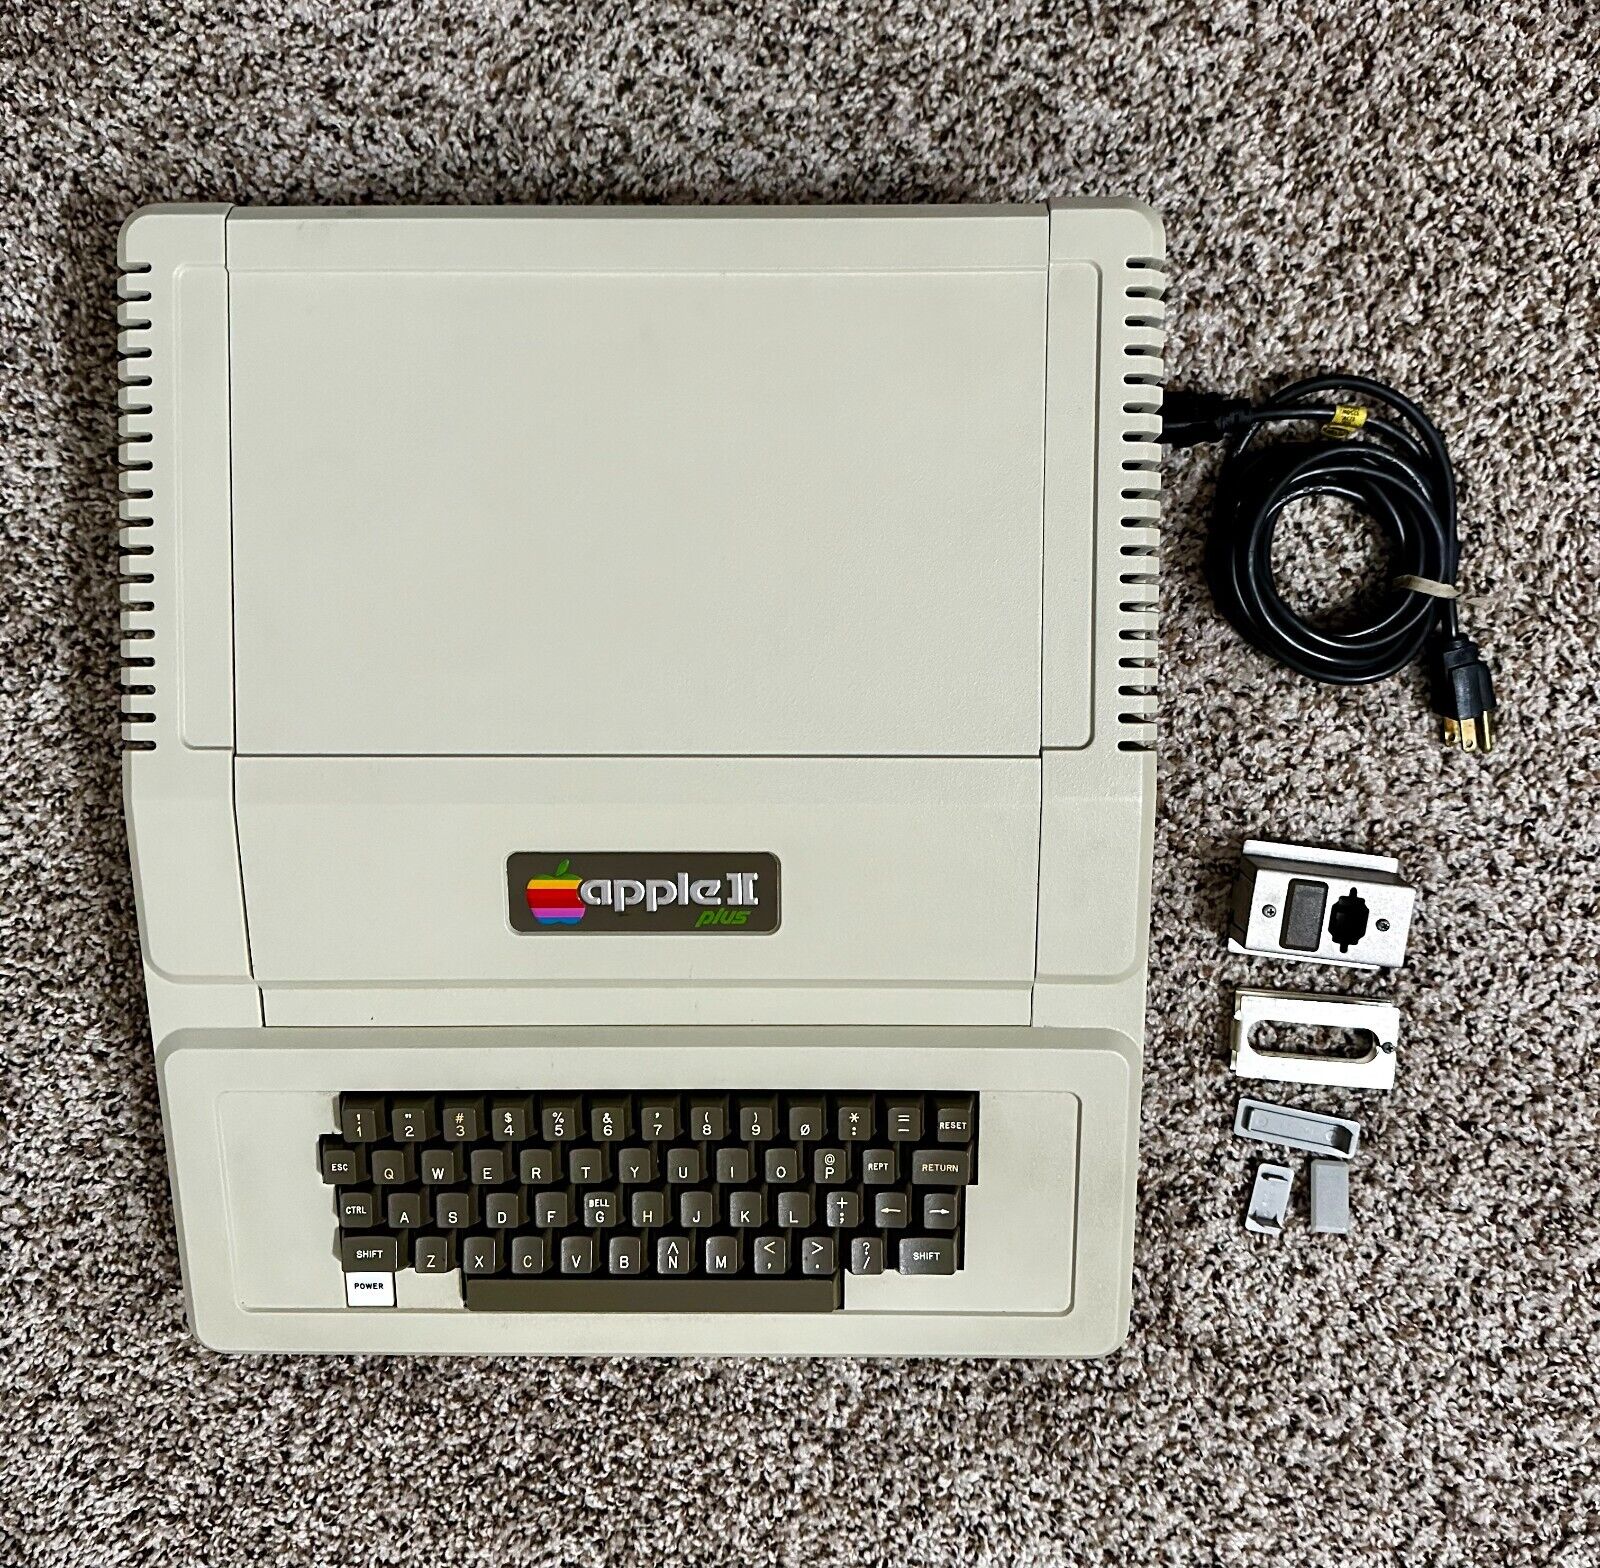 Vintage Apple II Plus A2S1048 Personal Computer